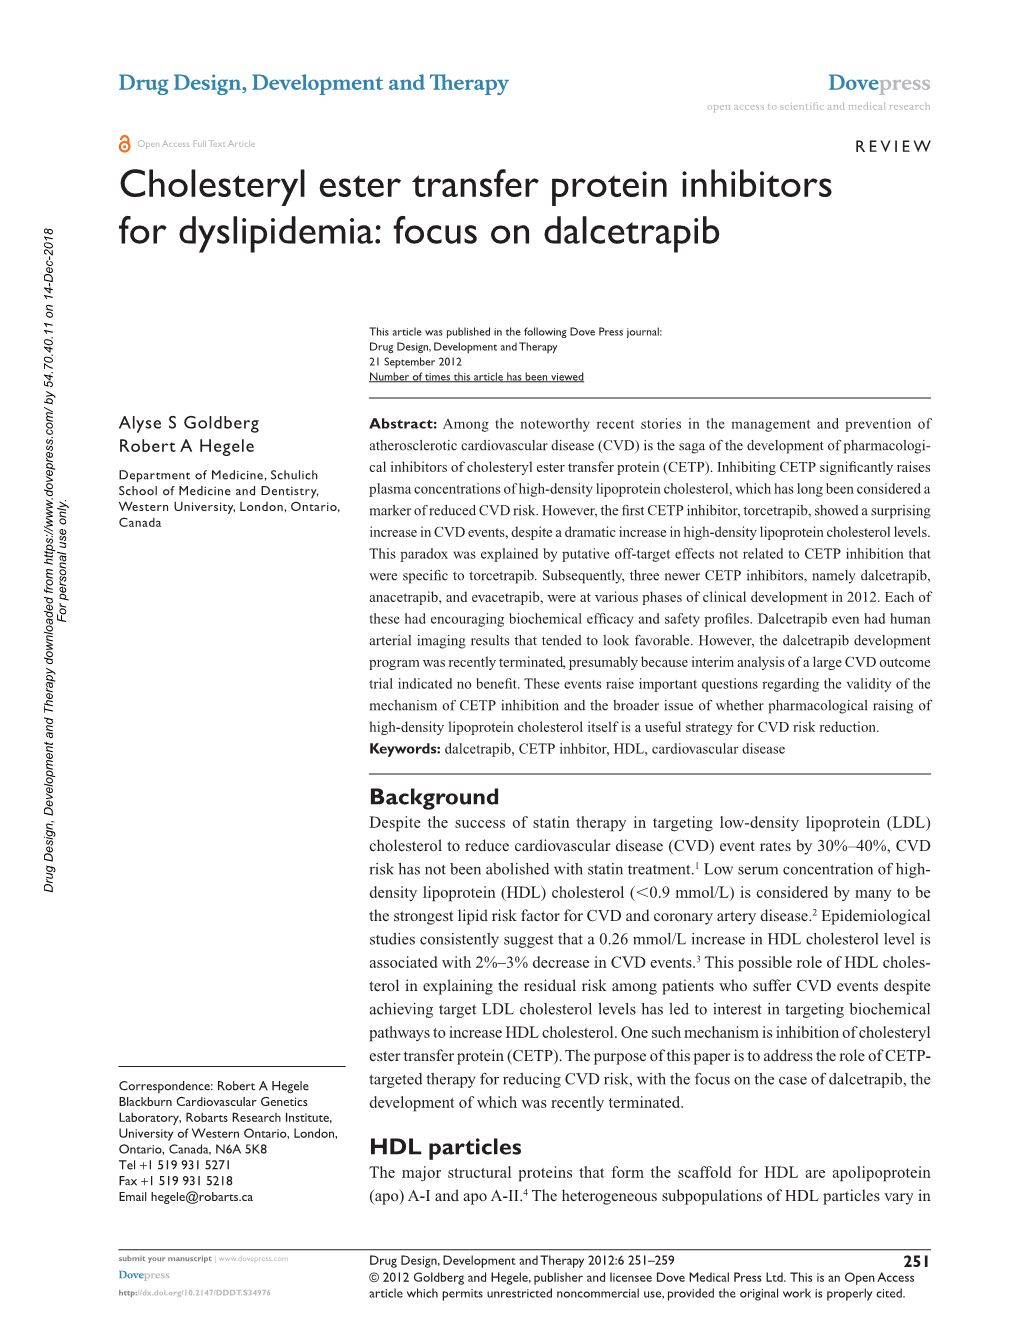 Cholesteryl Ester Transfer Protein Inhibitors for Dyslipidemia: Focus on Dalcetrapib